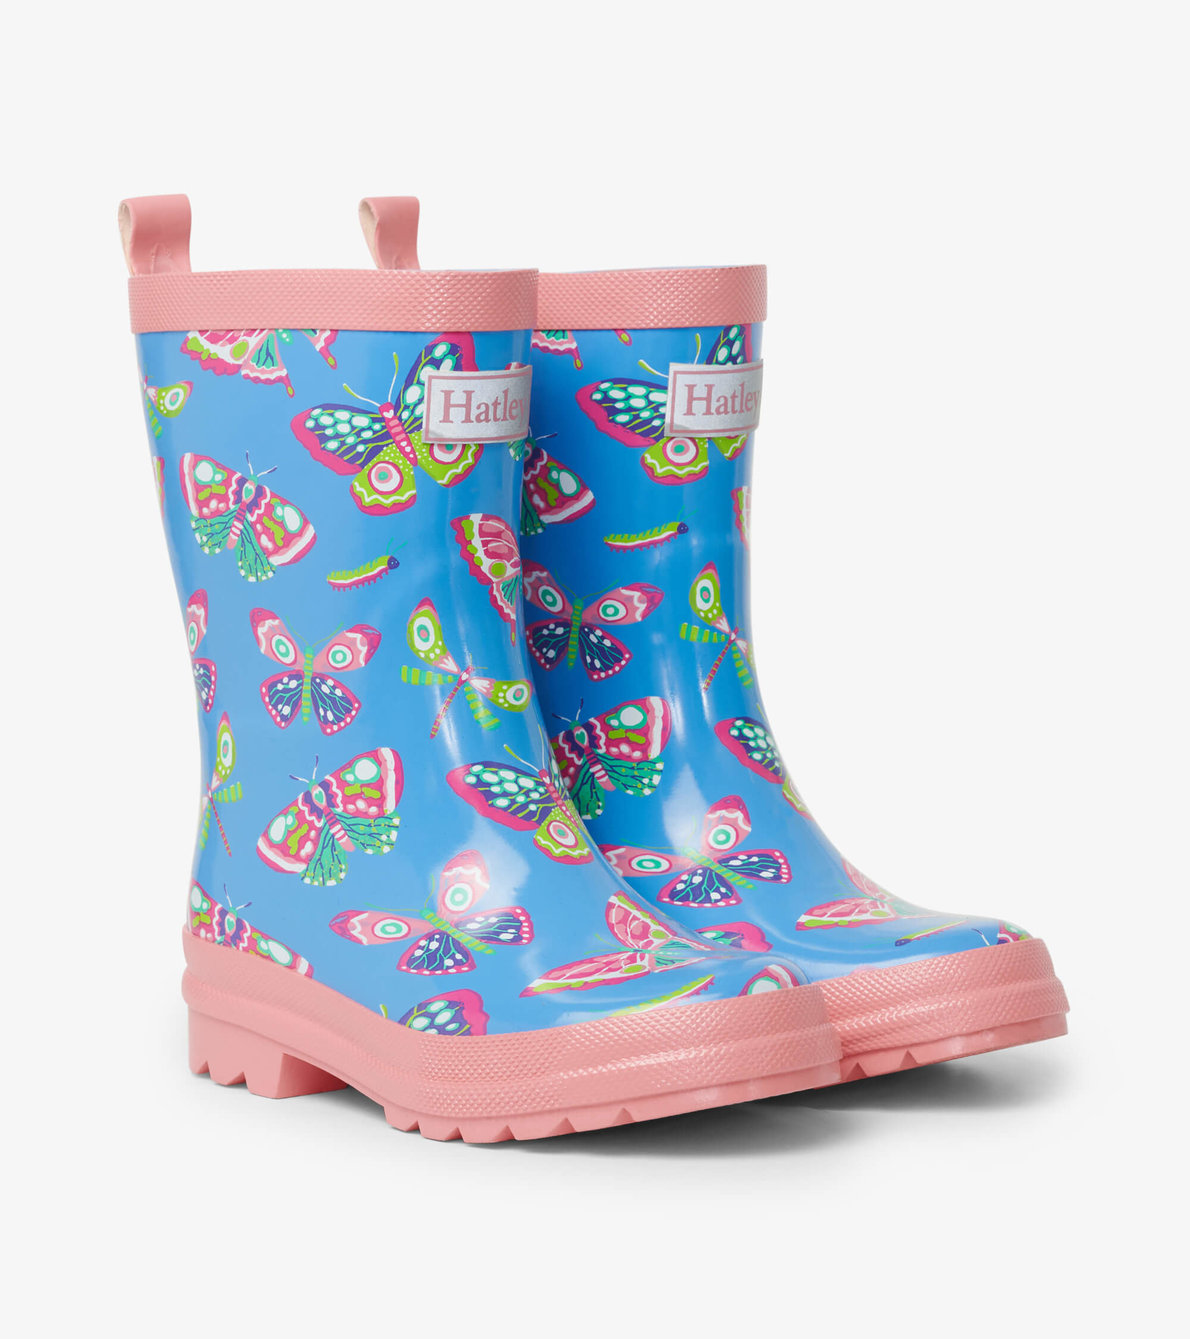 View larger image of Botanical Butterflies Shiny Rain Boots